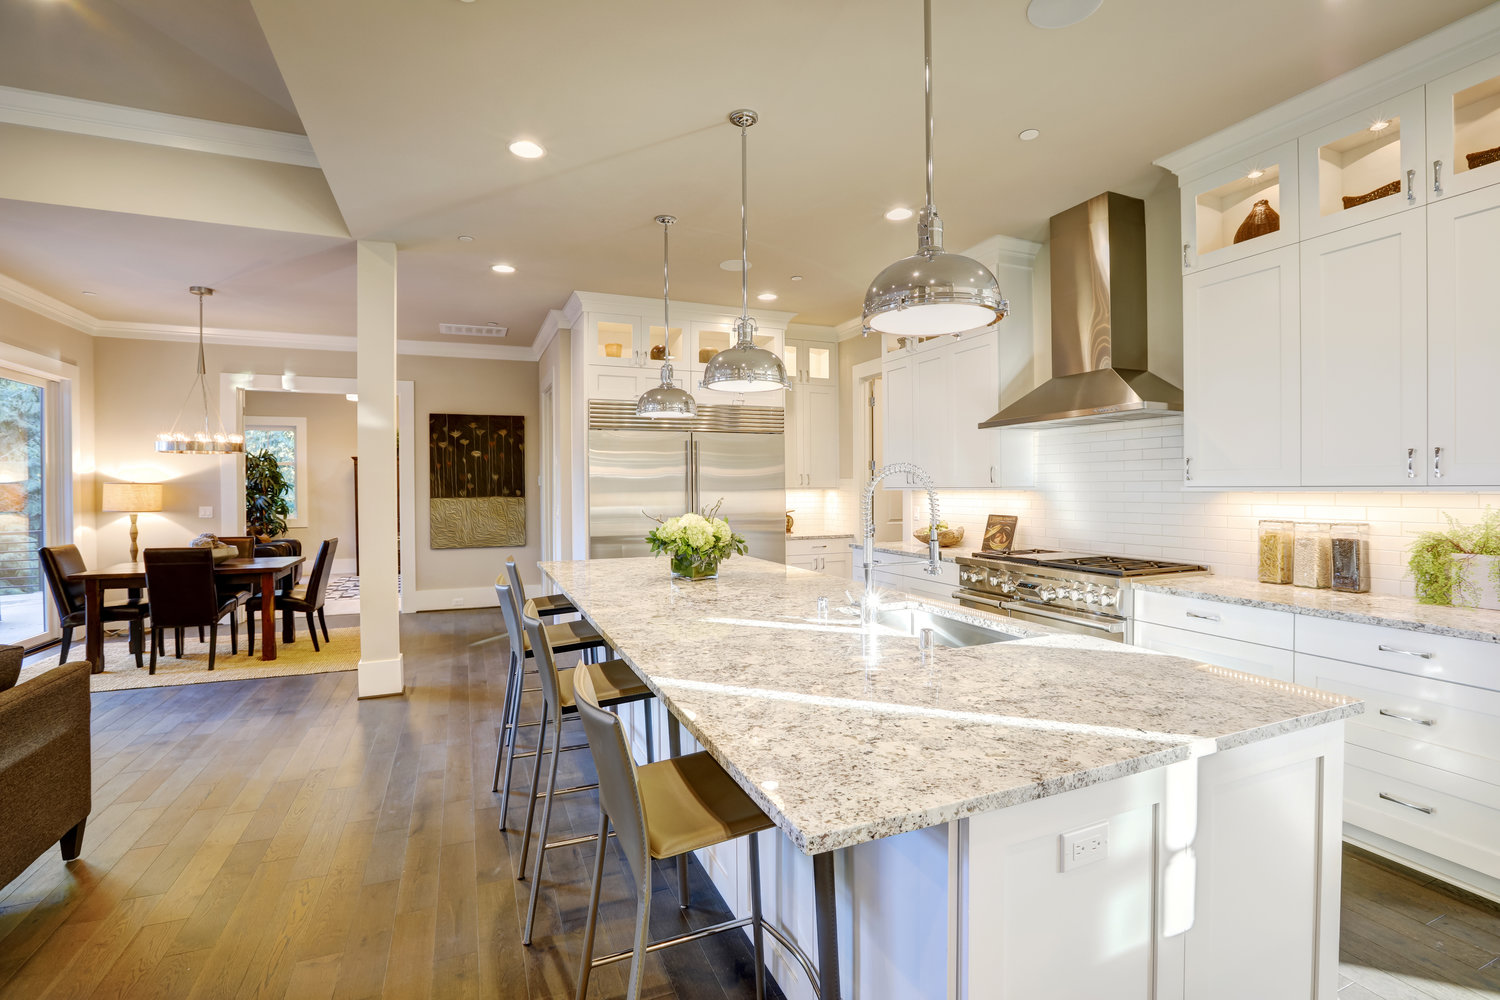 remodeling your kitchen with style image